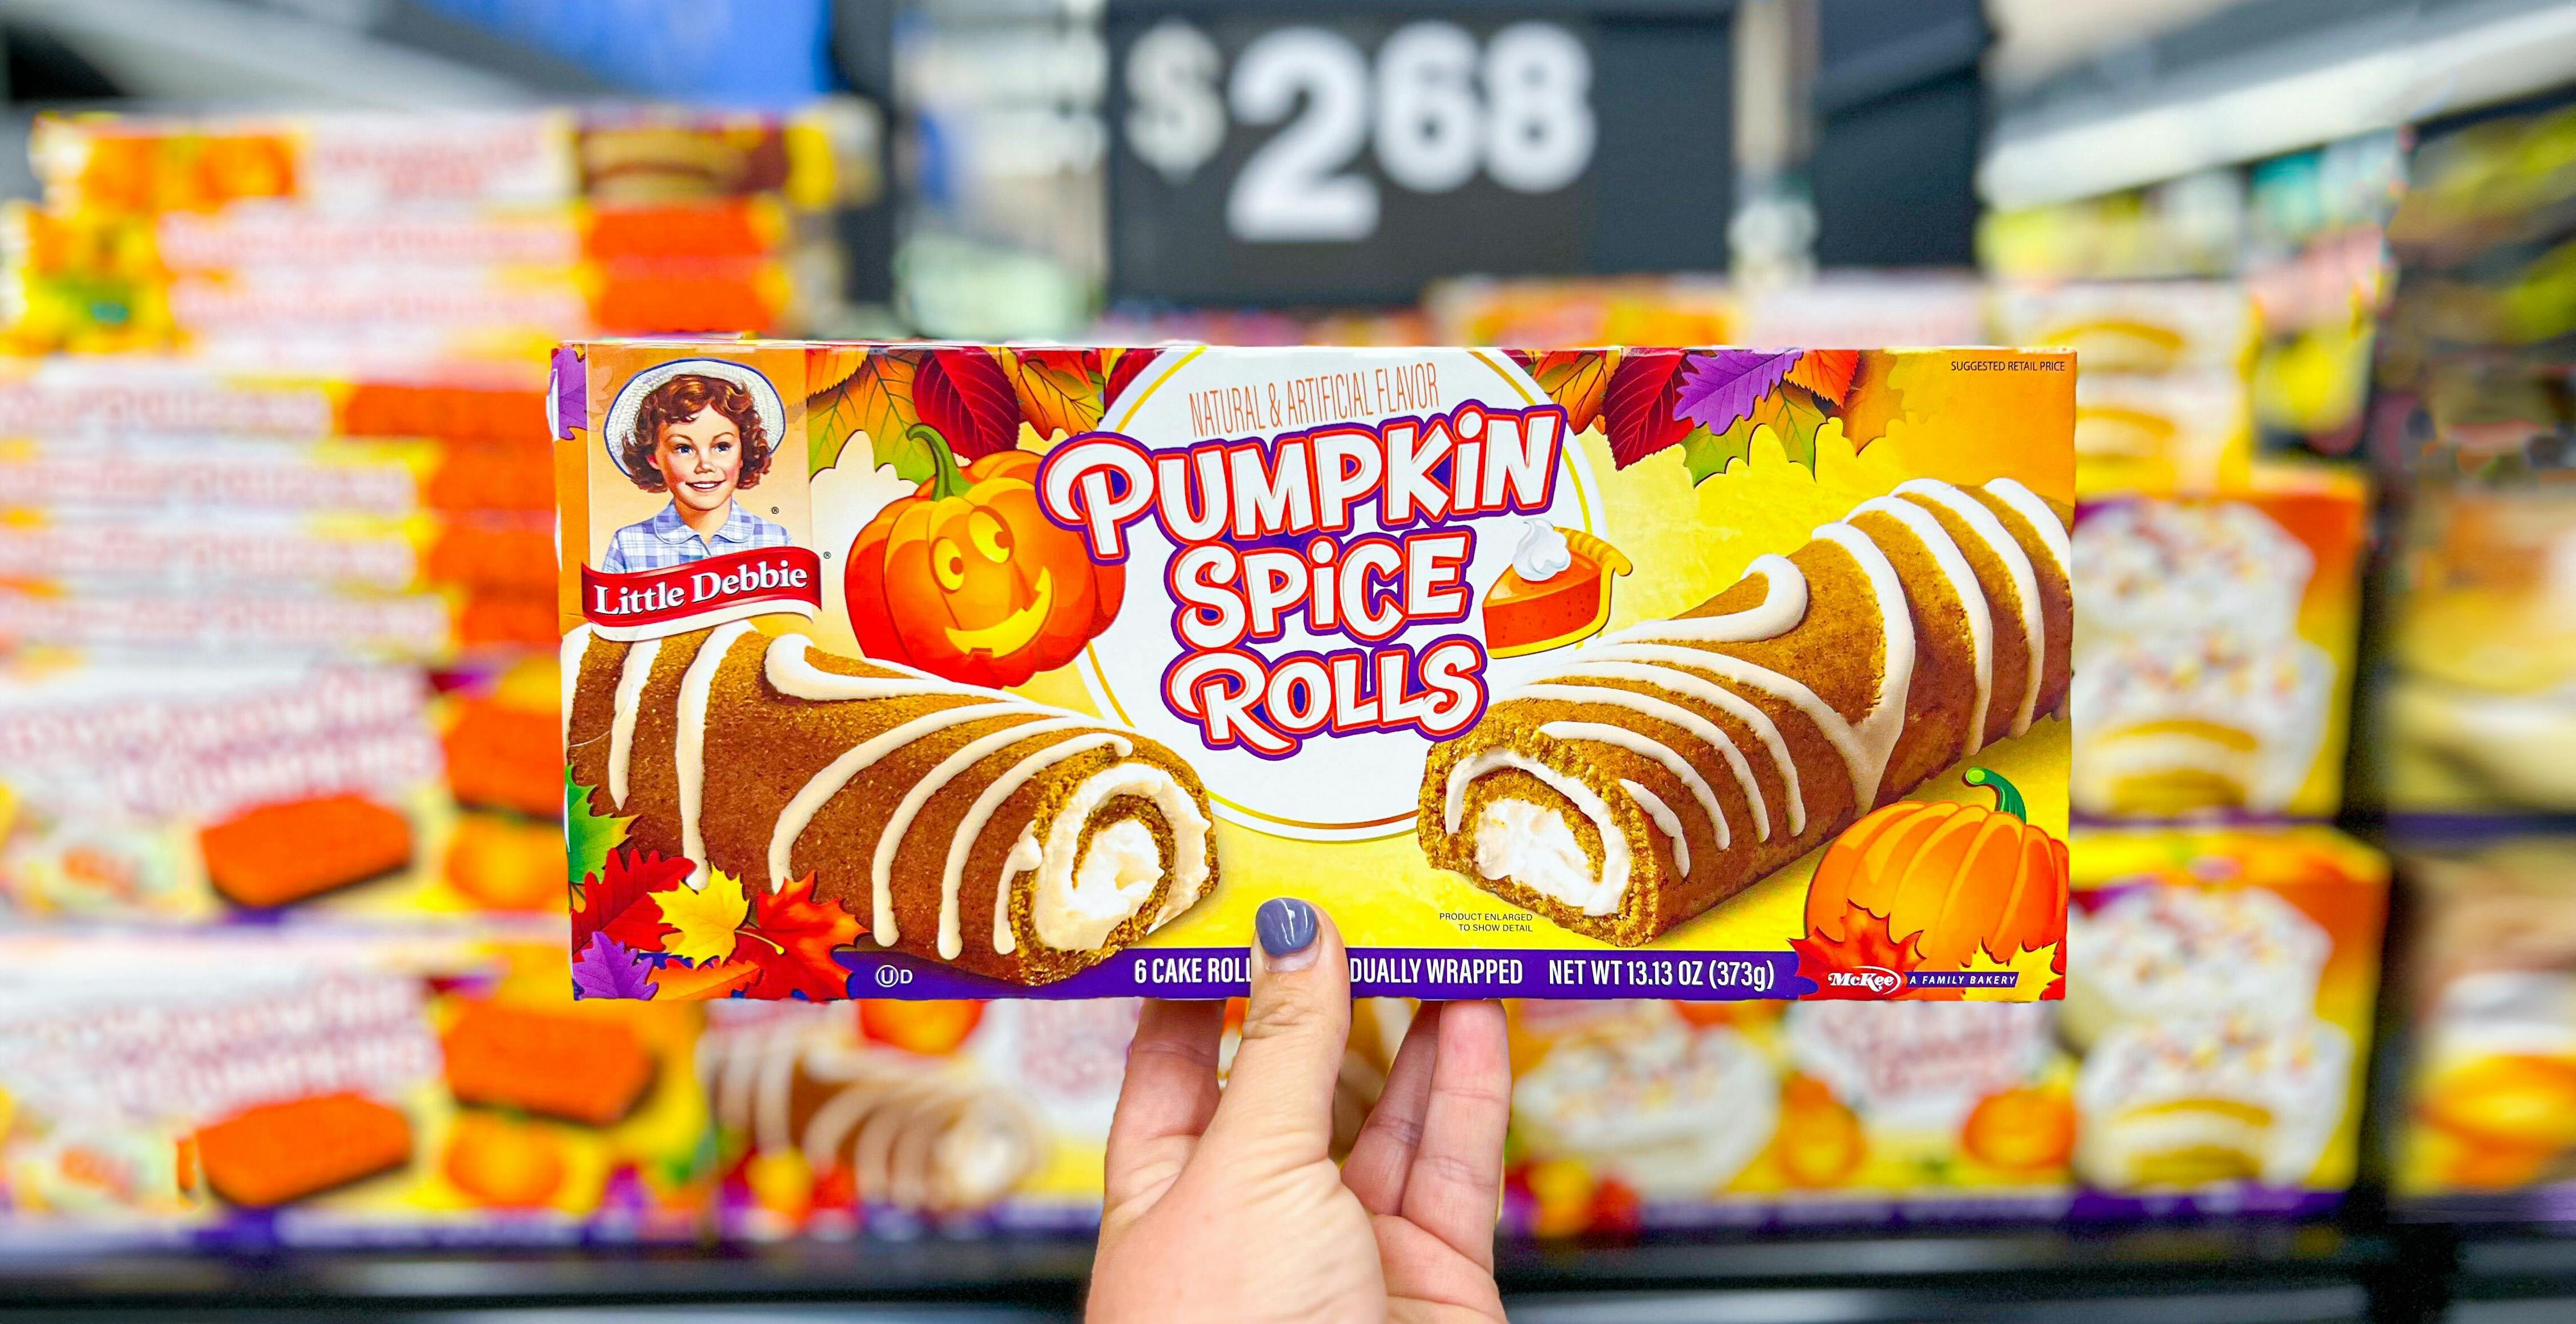 Little Debbie Is Packing BIG Flavor in the Freezer Section Soon